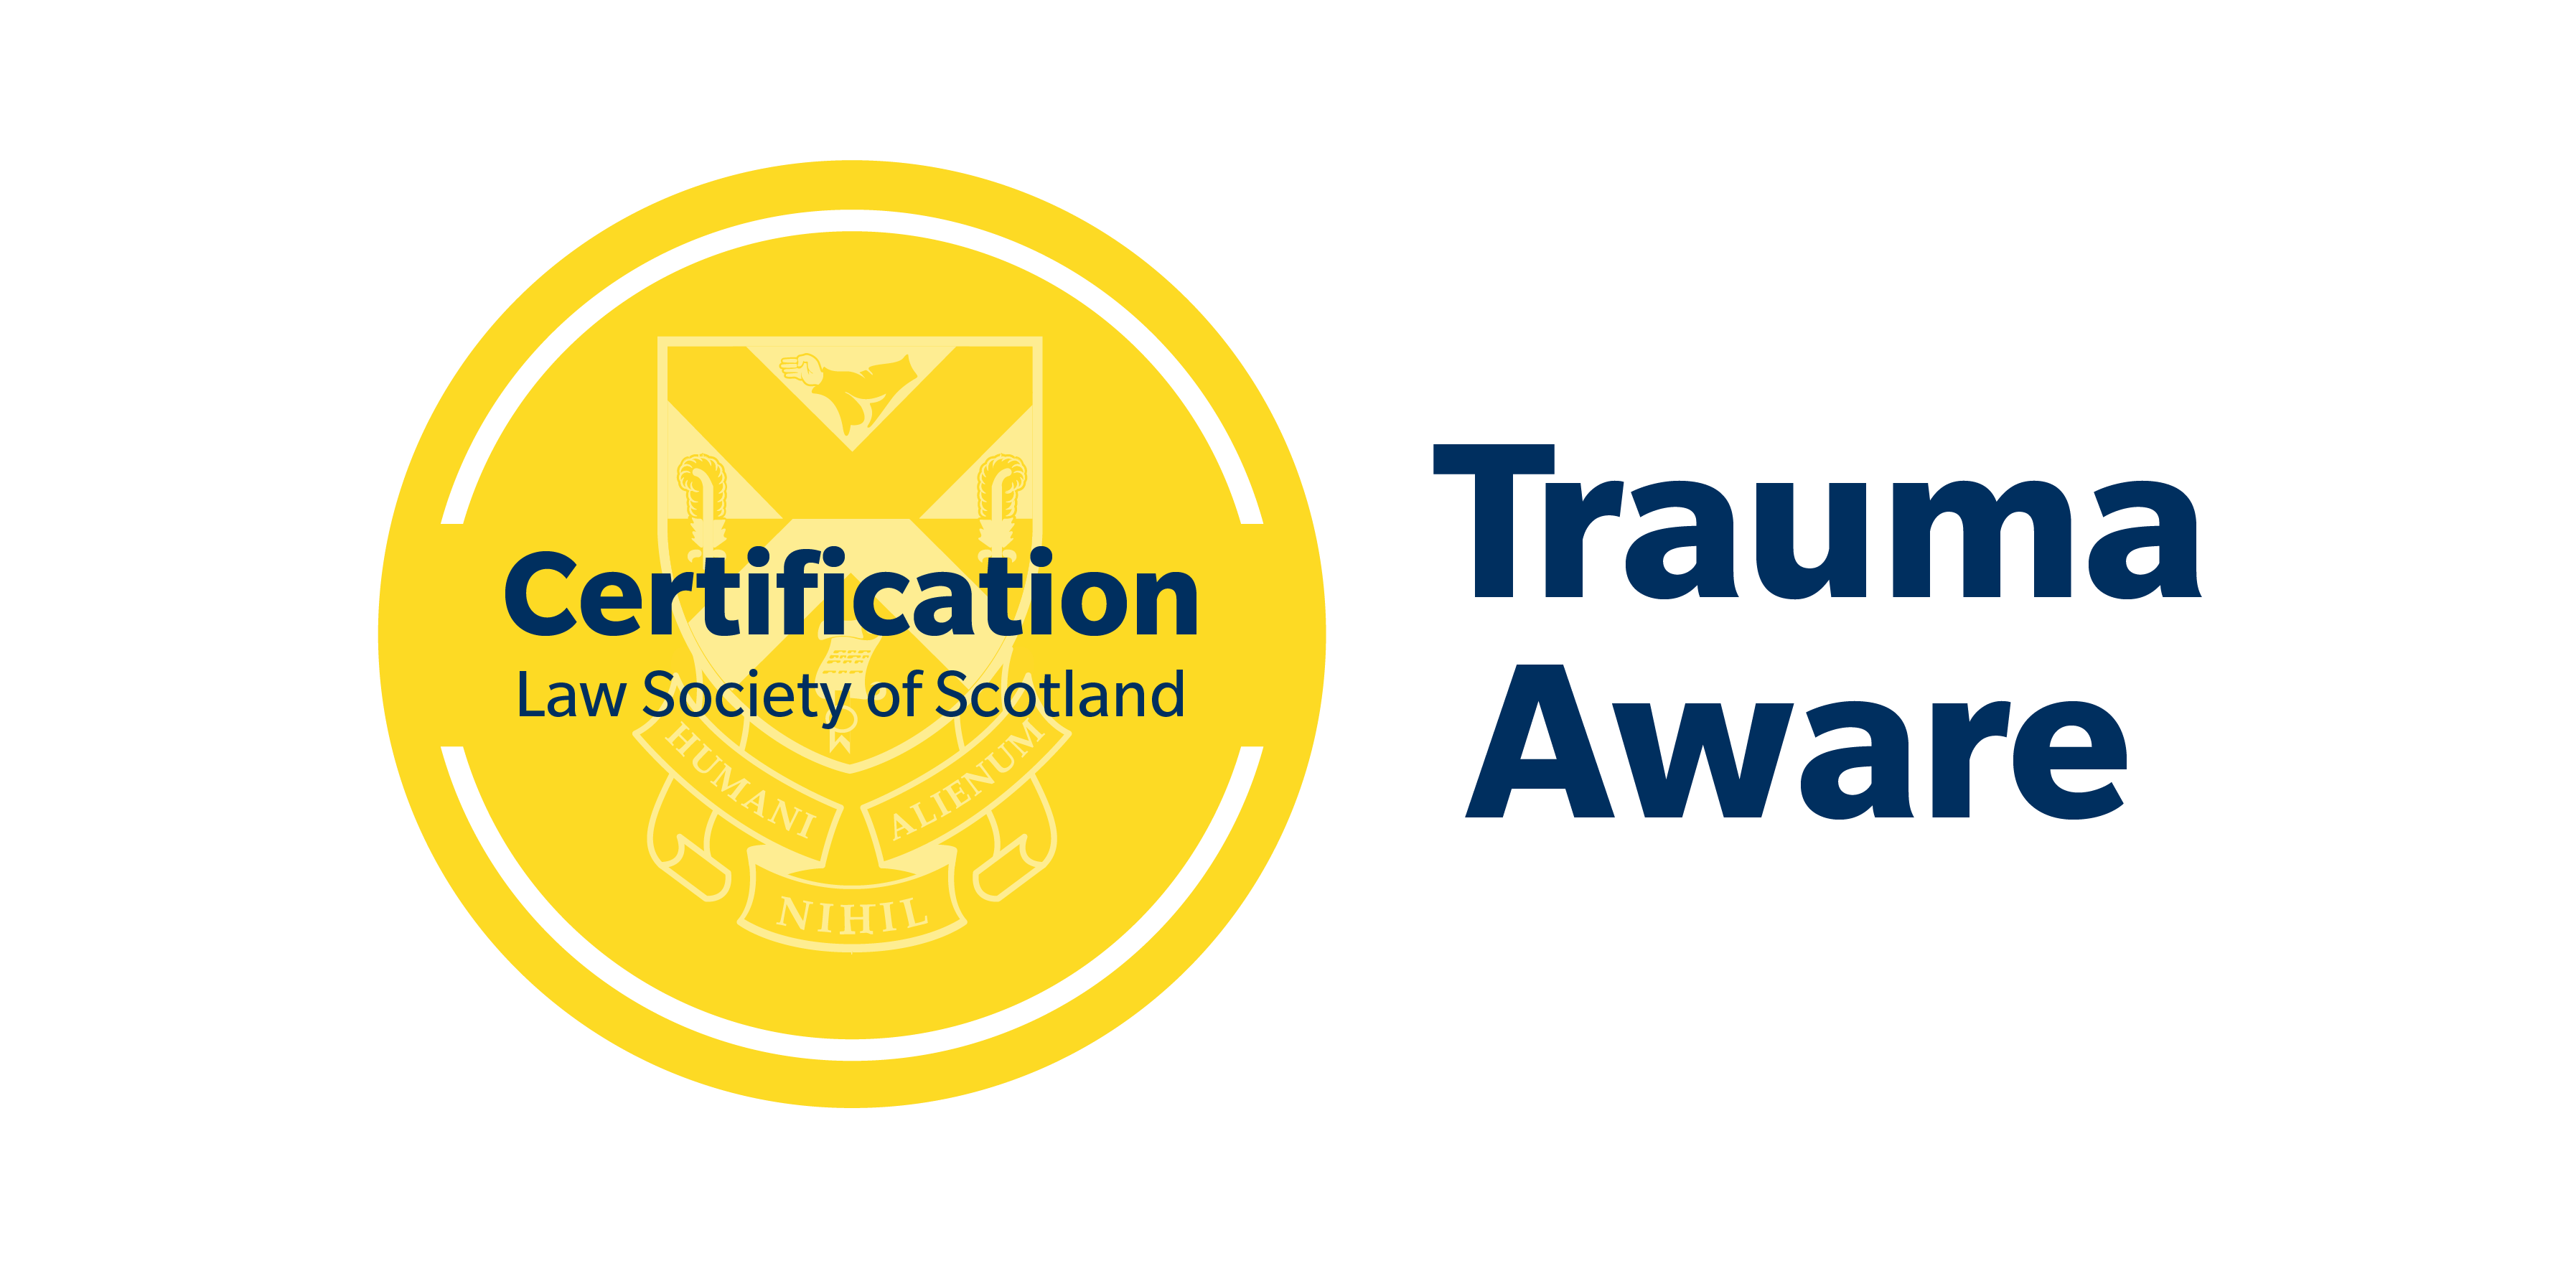 Certification by Law Society of Scotland for Trauma Aware course